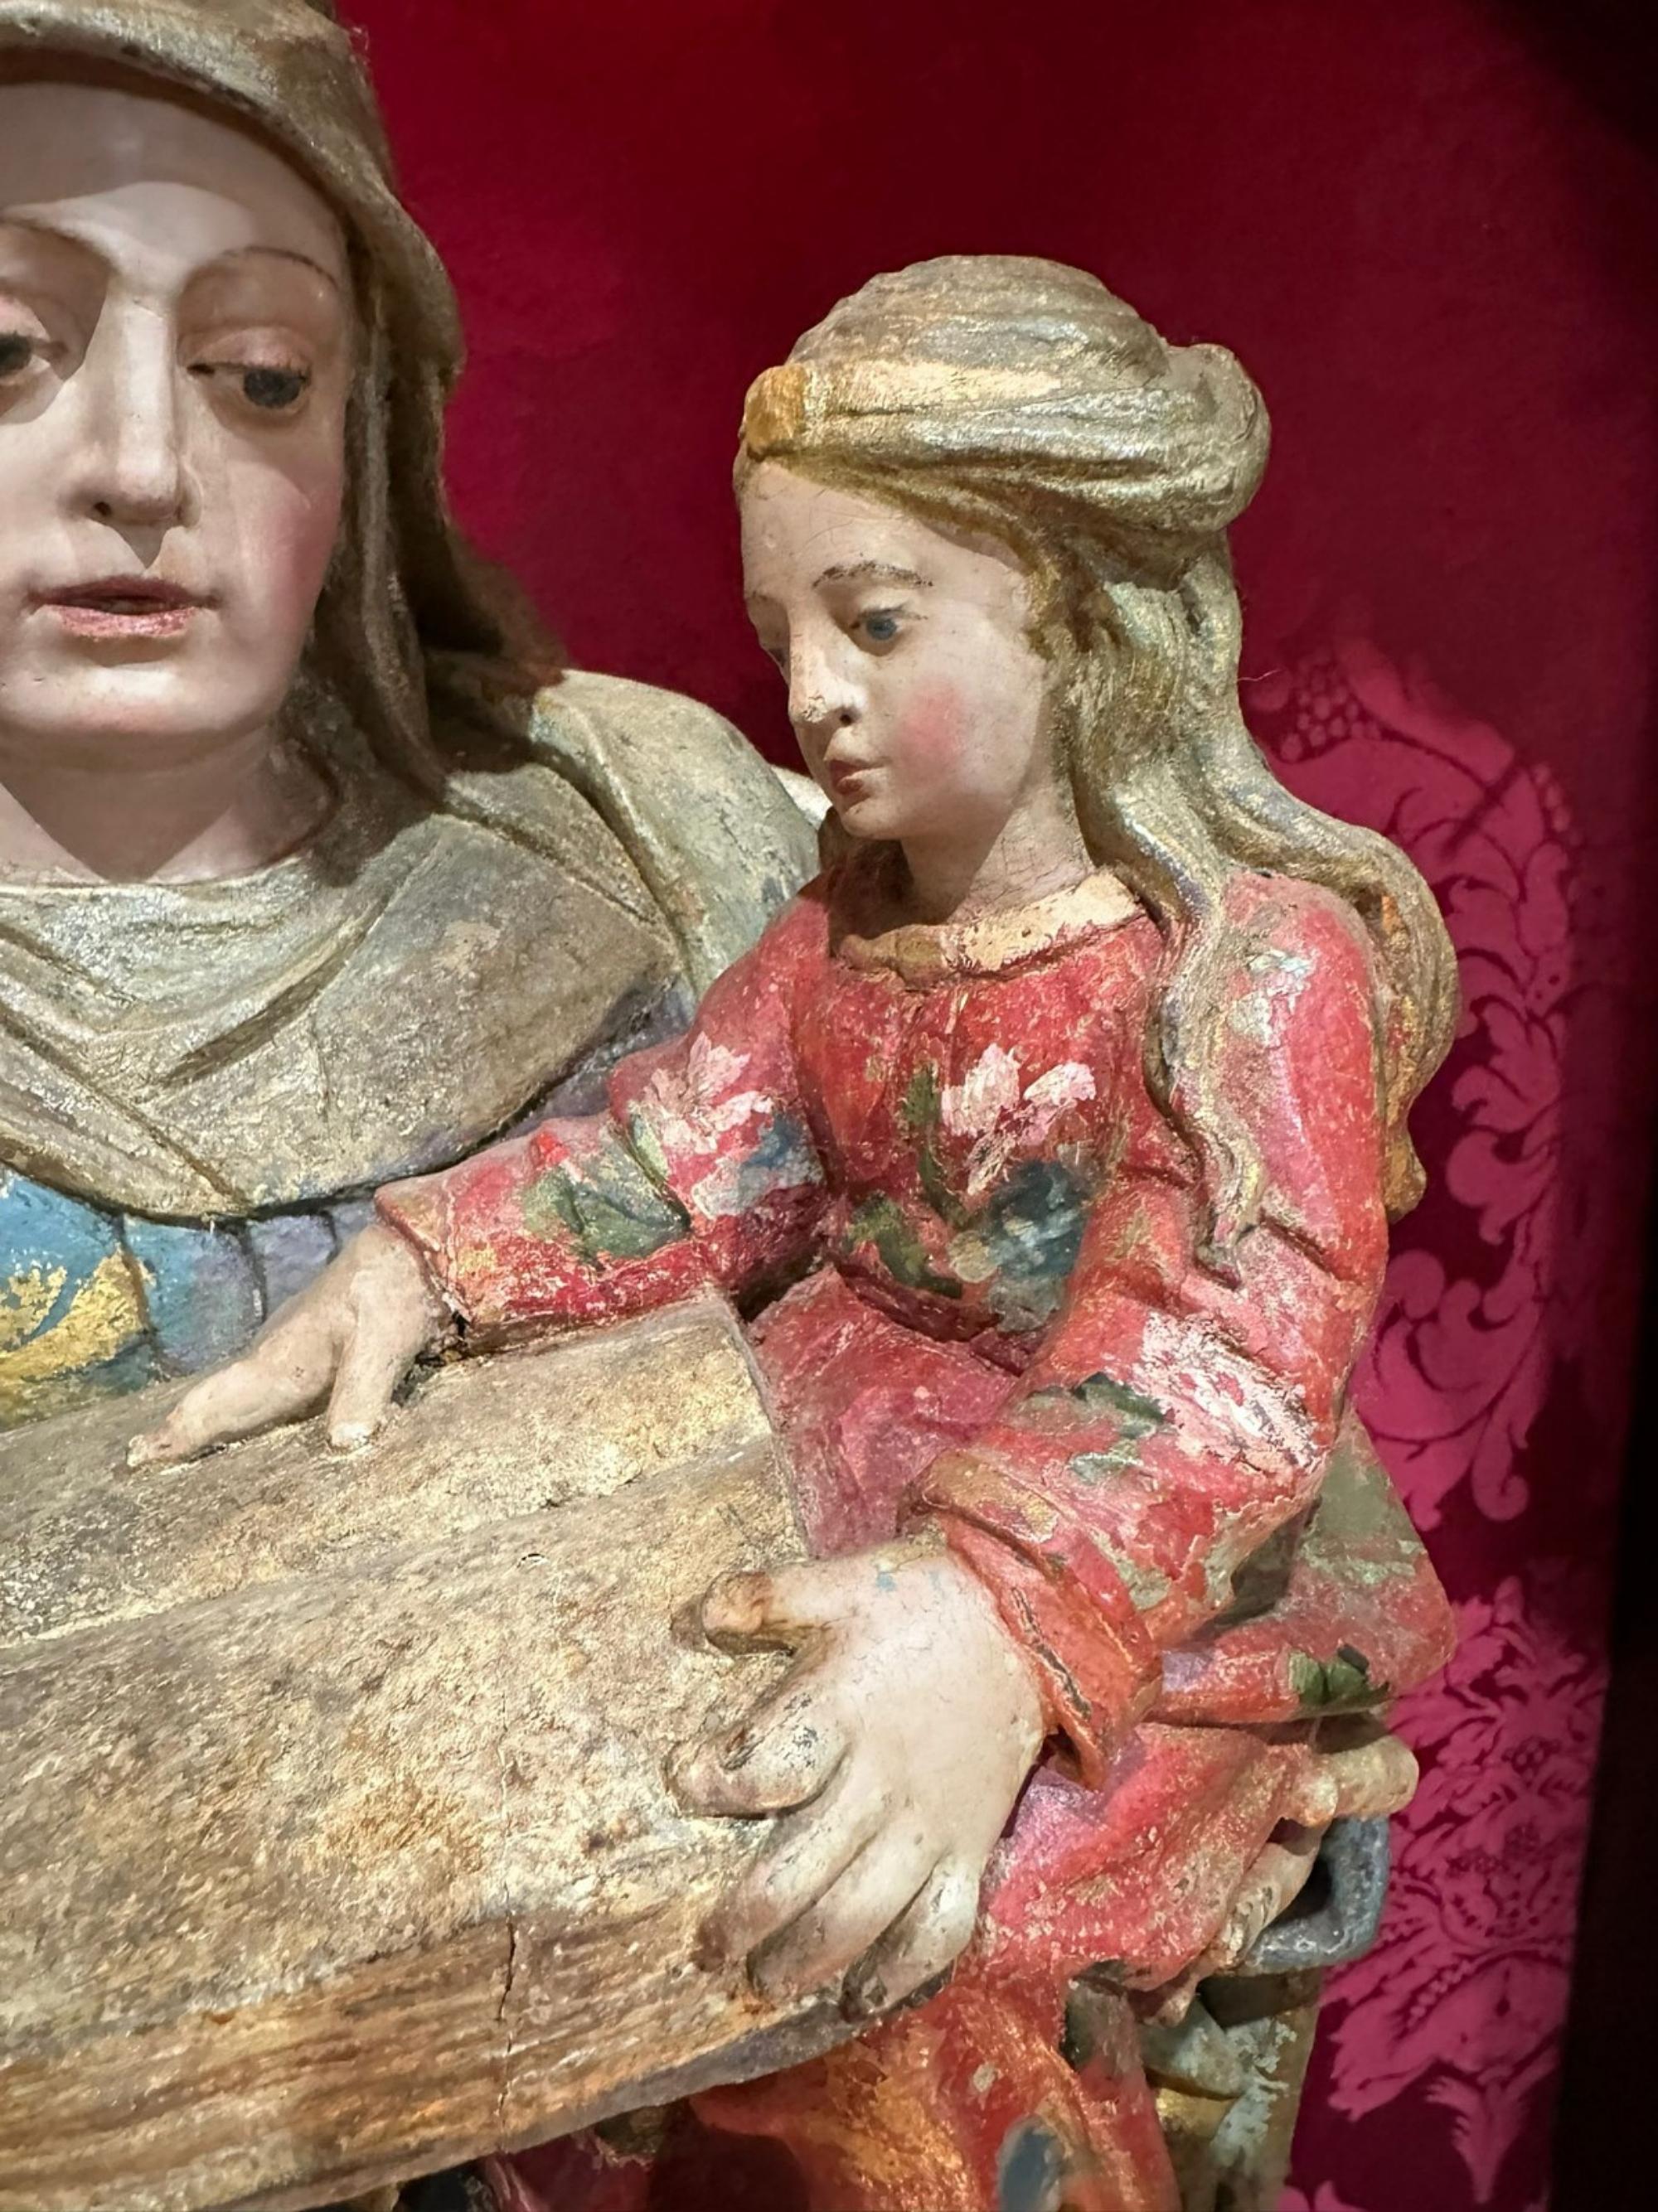 Hand-Crafted Important Portuguese Sculpture from the 17th Century, 